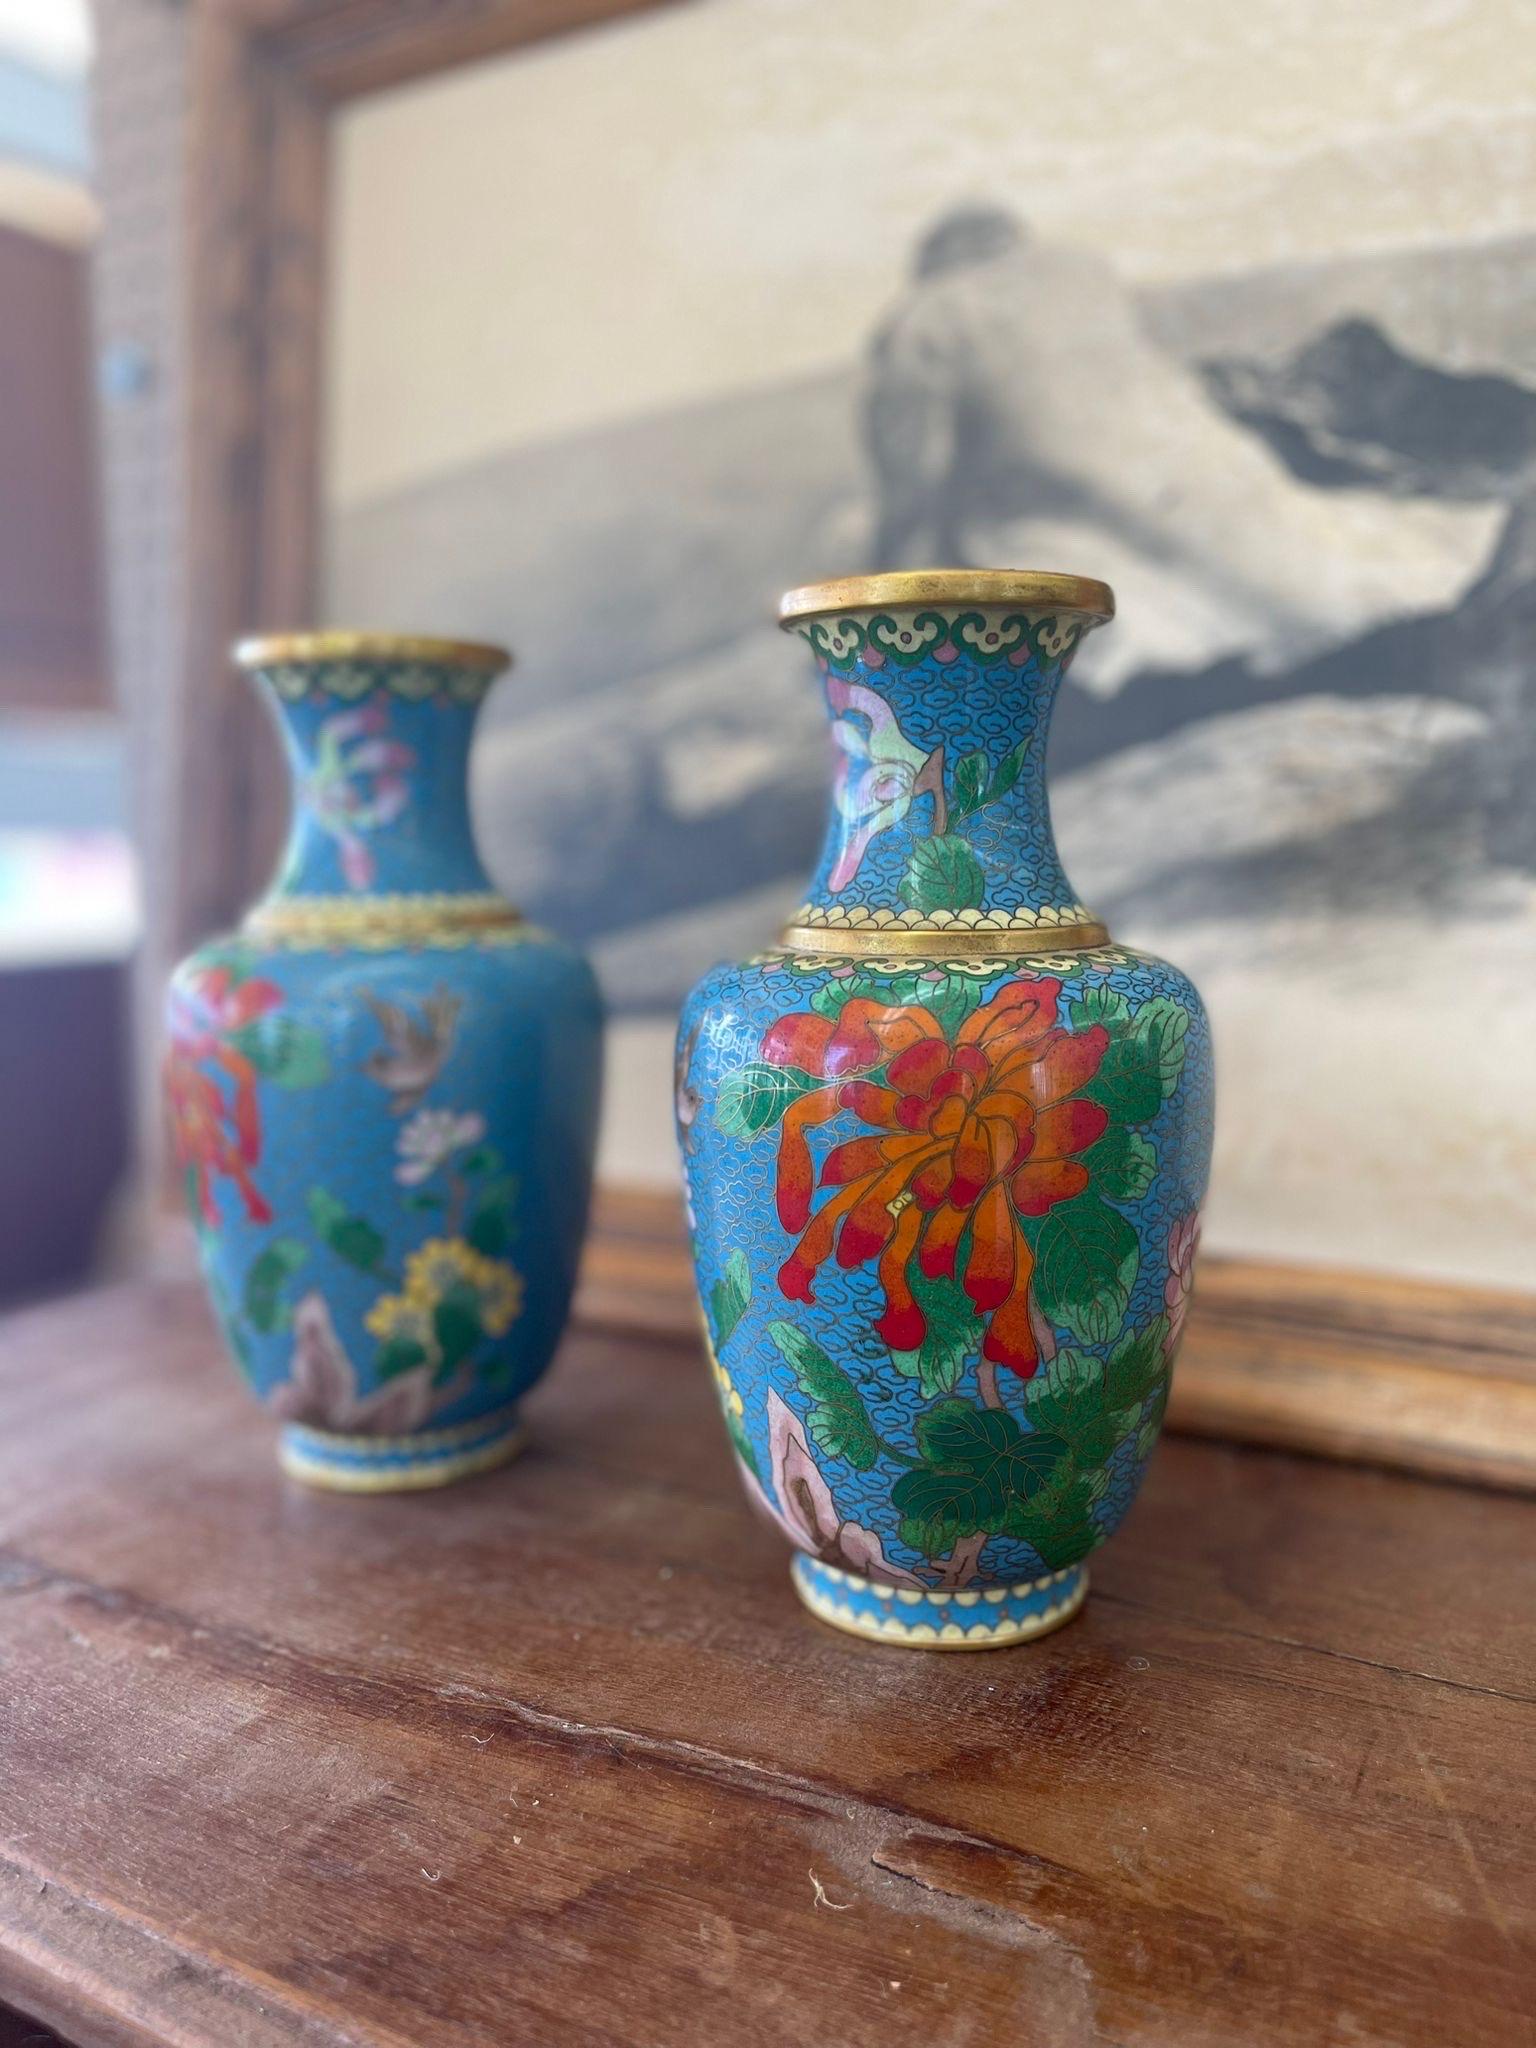 Set of Two Vases, Featuring Bright Orange, Pink, and Yellow Flower’s, Birds and a Blue Background. Unsigned, Gold Colored Cloud Outlines.

Dimensions. 5 W ; 5 D ; 9 H